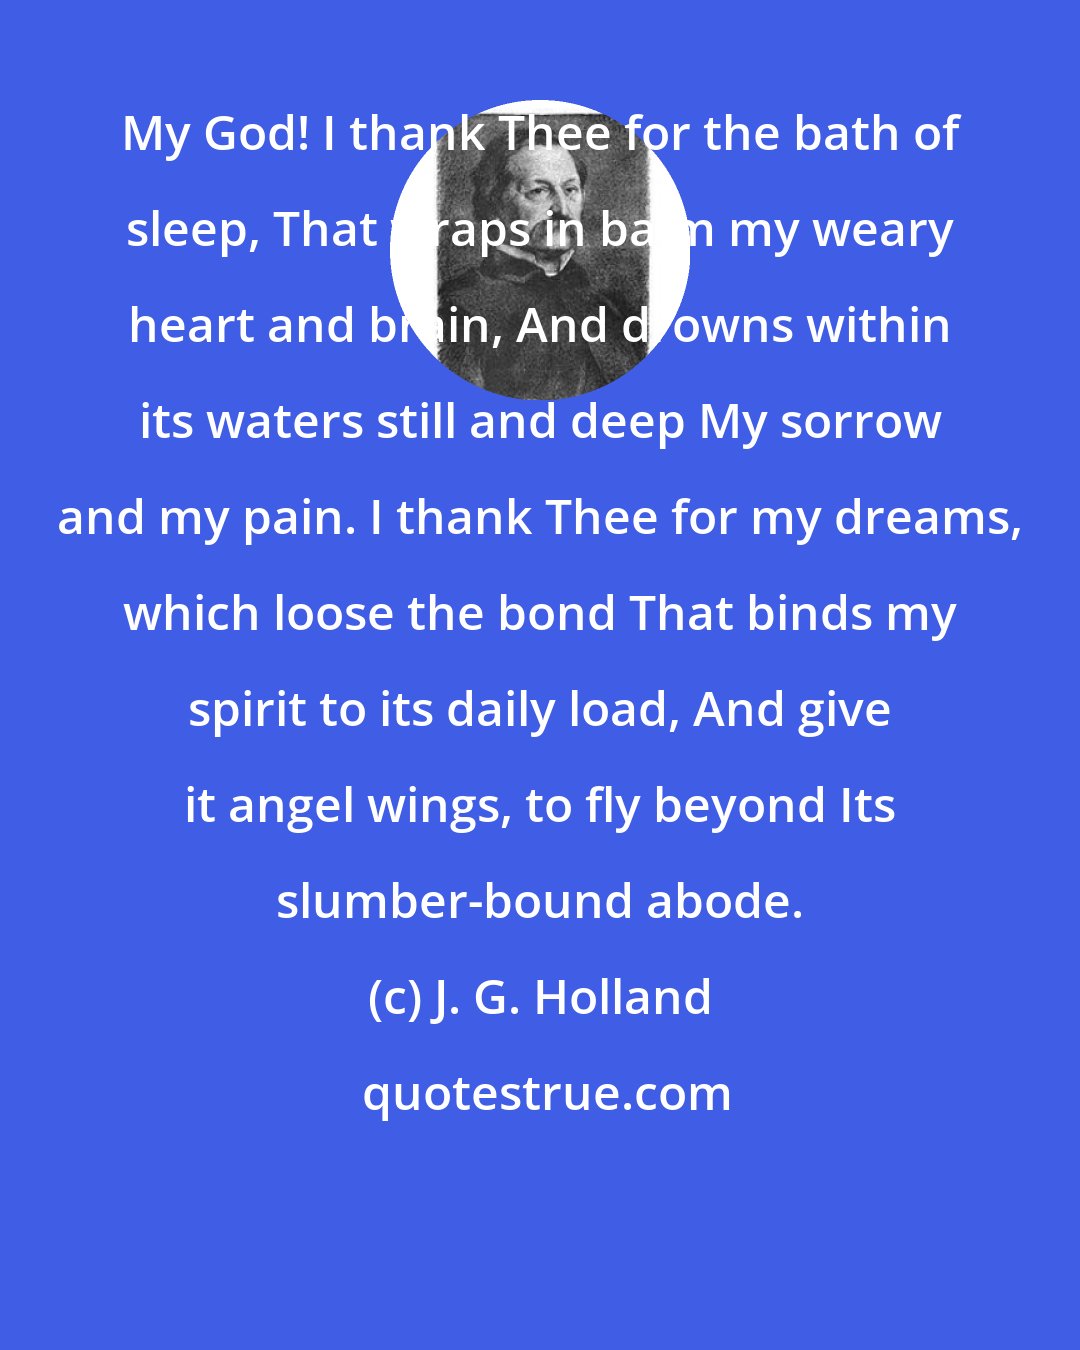 J. G. Holland: My God! I thank Thee for the bath of sleep, That wraps in balm my weary heart and brain, And drowns within its waters still and deep My sorrow and my pain. I thank Thee for my dreams, which loose the bond That binds my spirit to its daily load, And give it angel wings, to fly beyond Its slumber-bound abode.